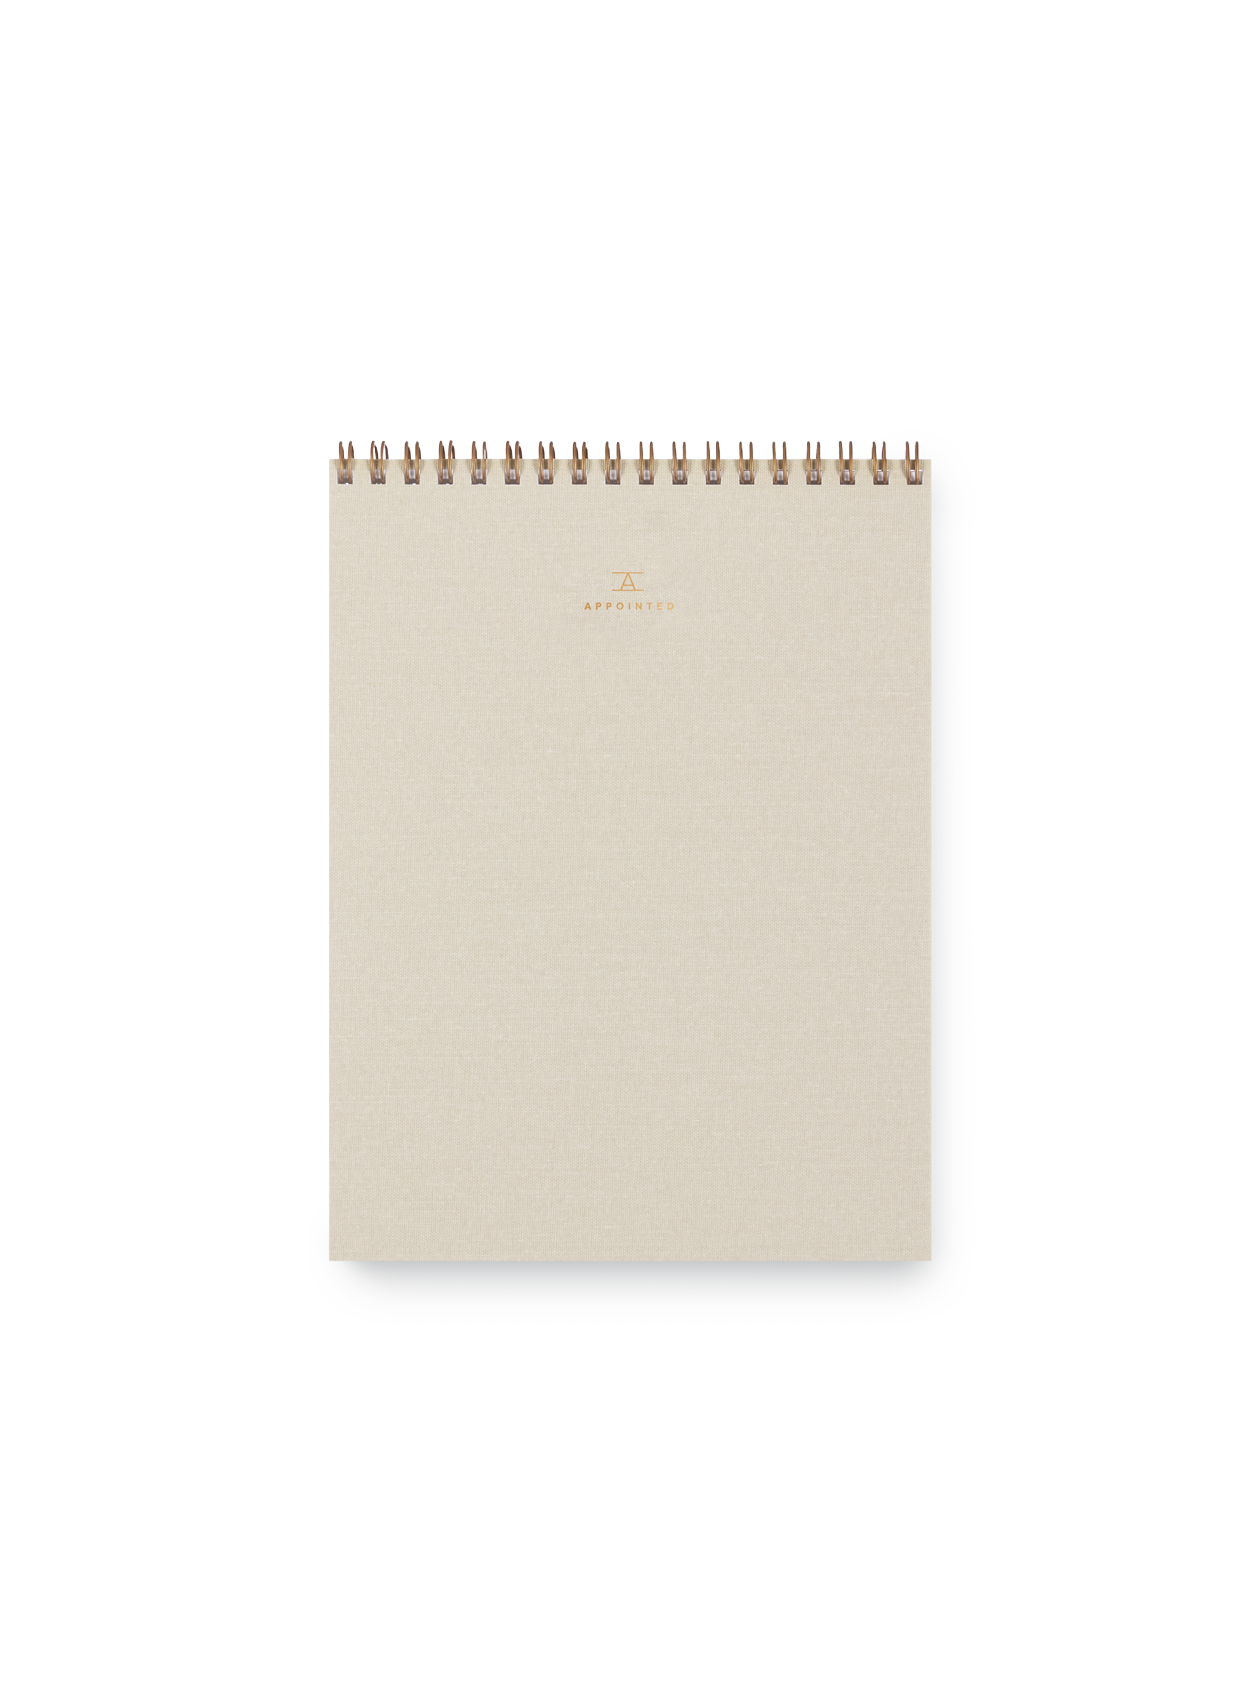 Appointed Office Notepad with gold foil details, bookcloth cover, and brass wire-o binding || Natural Linen